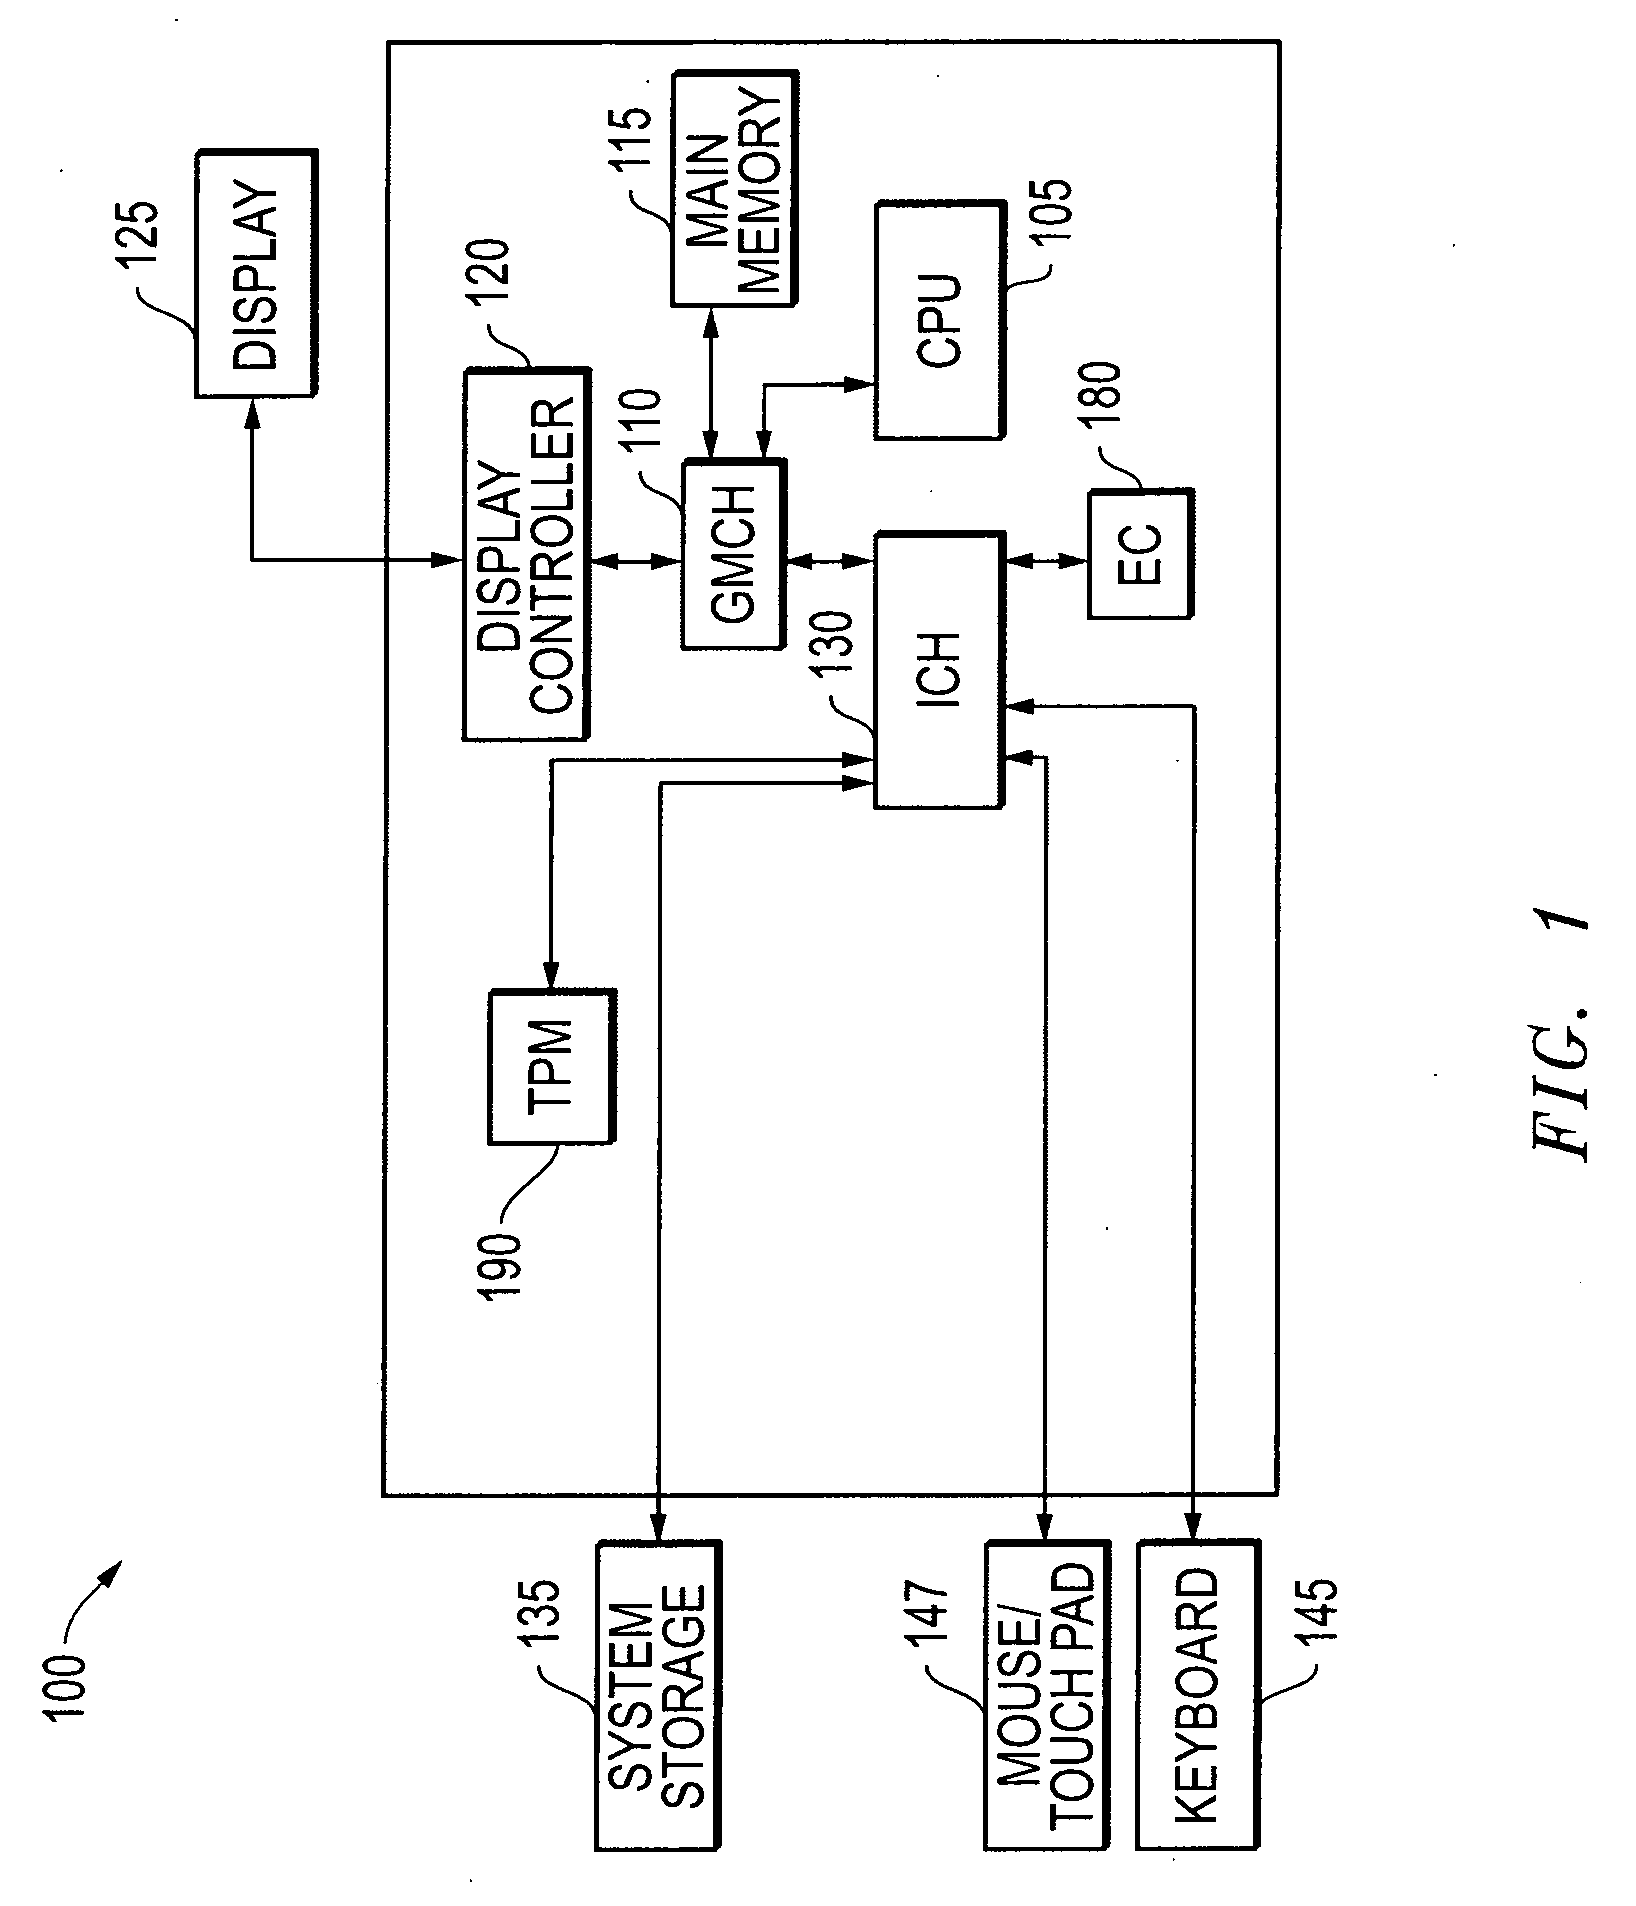 Methods and systems for embedded user authentication and/or providing computing services using an information handling system configured as a flexible computing node